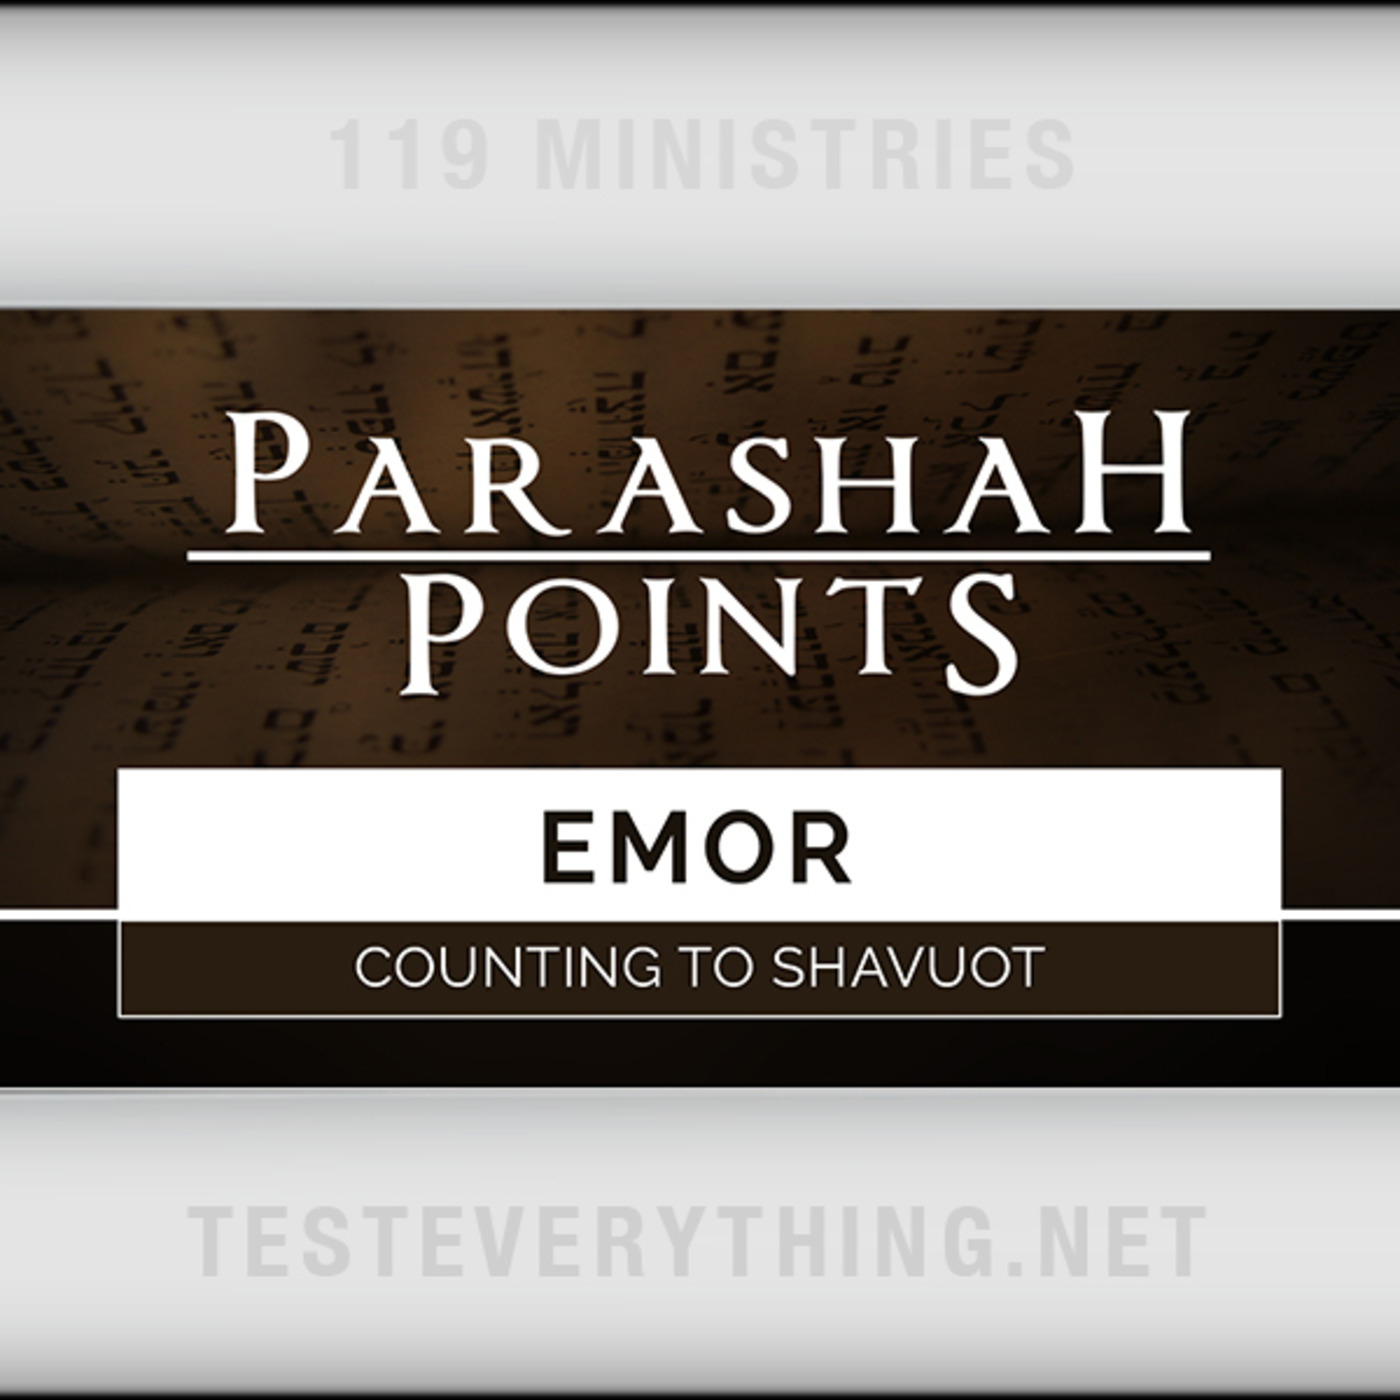 Parashah Points: Emor - Counting to Shavuot